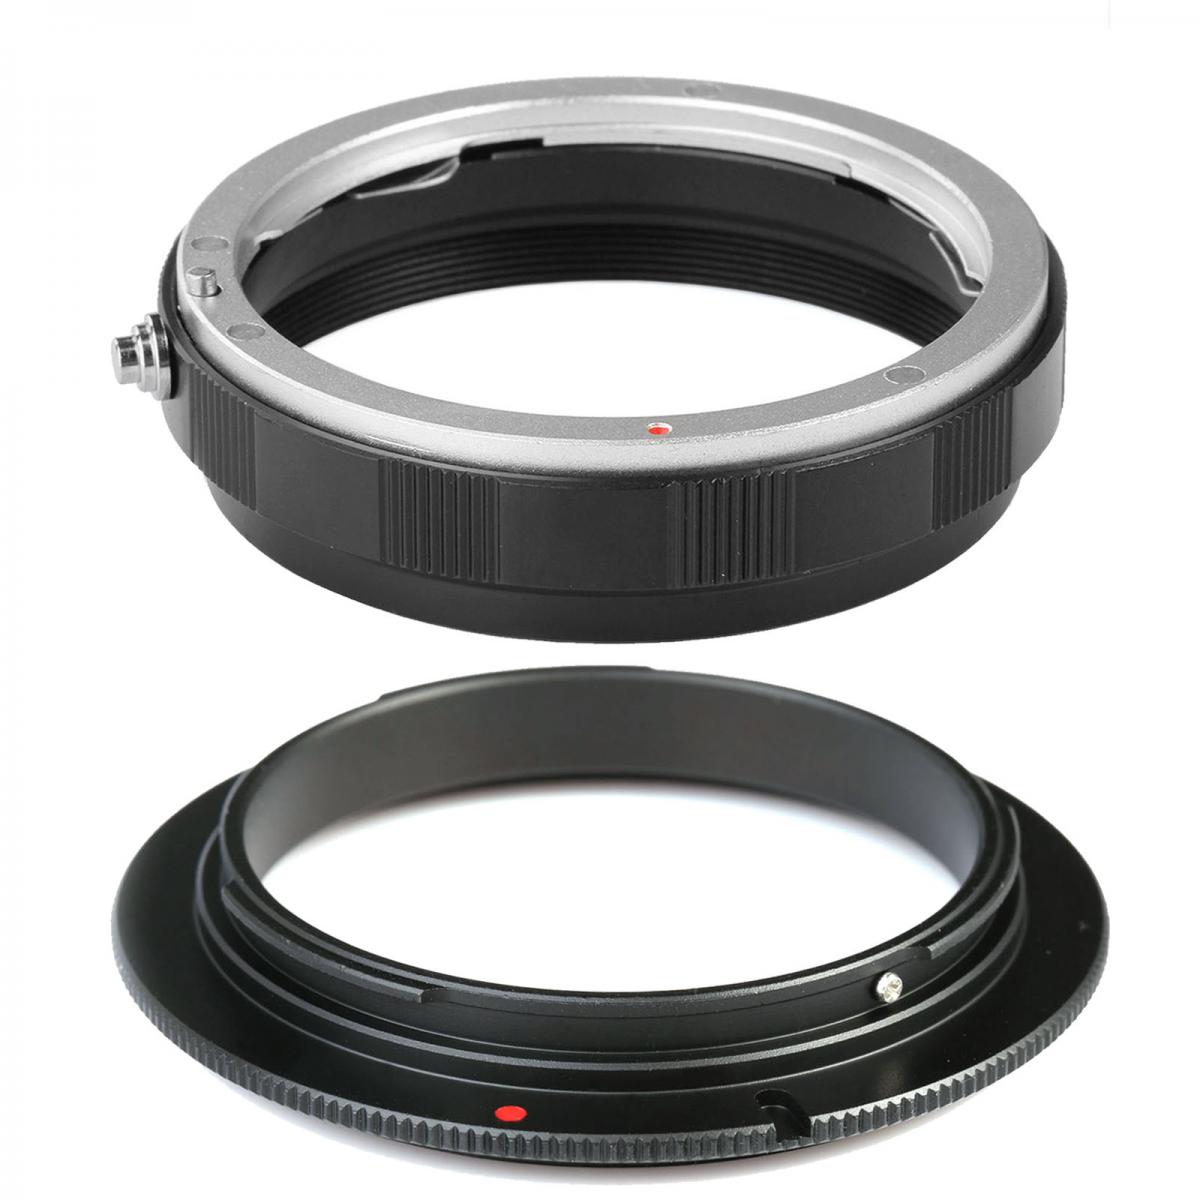 58mm Macro Reverse Adapter Ring Lens Mount Protection Ring For Canon